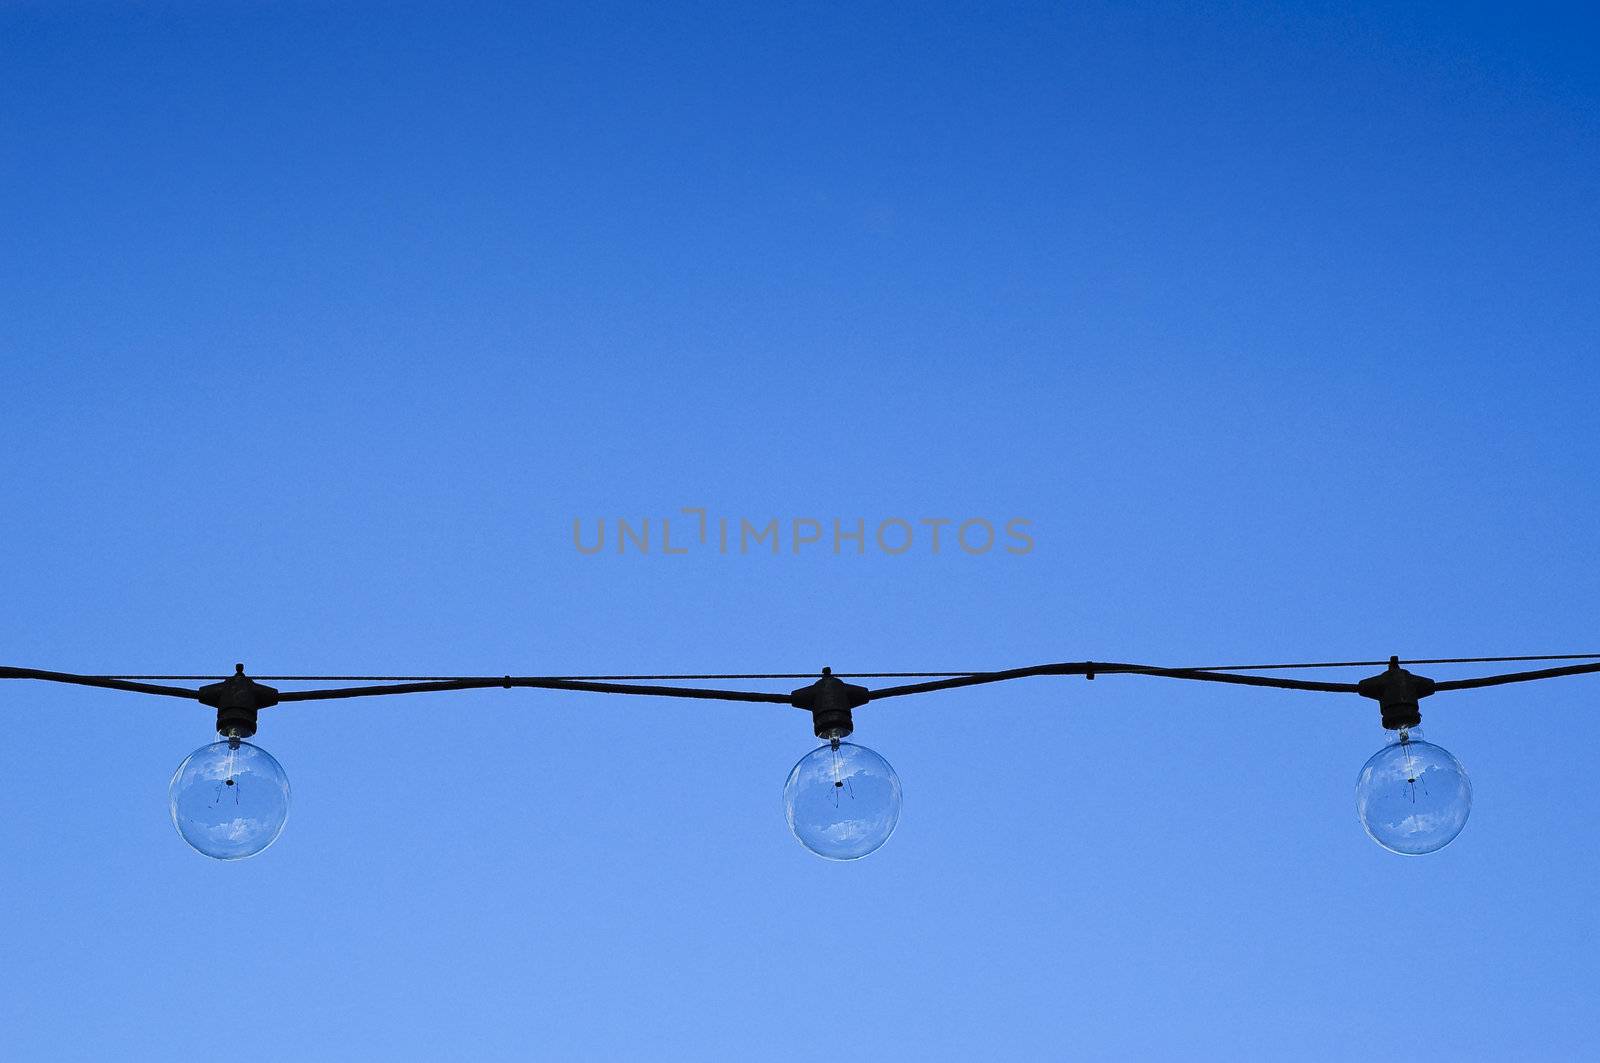 Three clear round light bulbs hanging against a blue summer sky